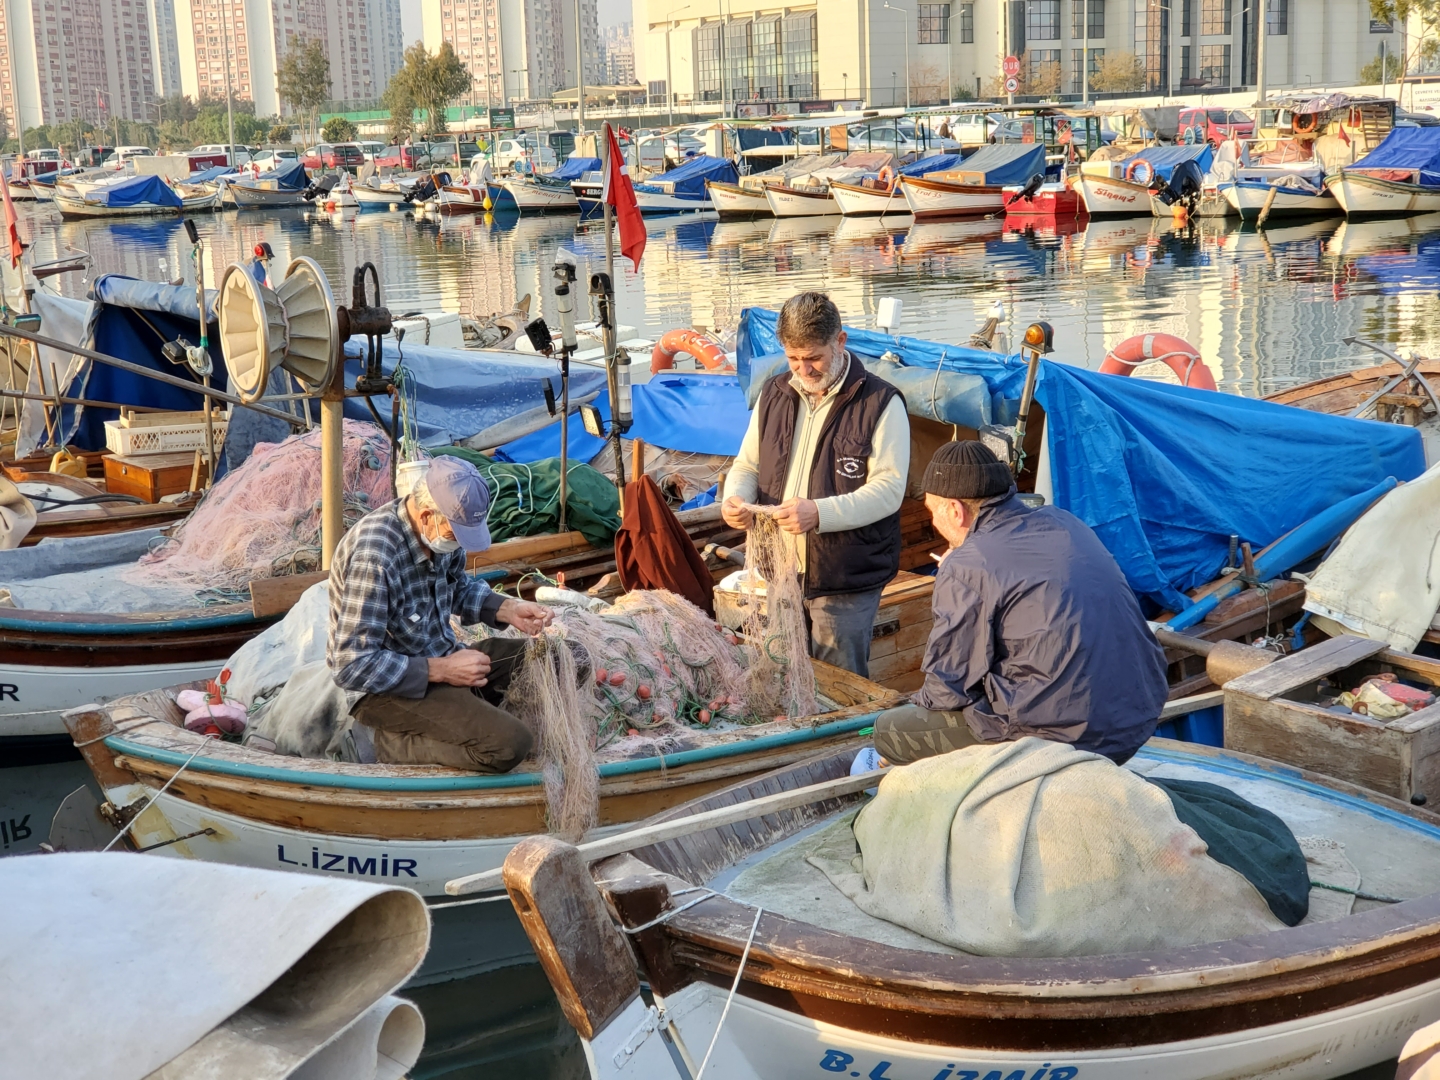 A group of fishermen tie their lines while they sit on boats in a harbor filled with many other fishing boats